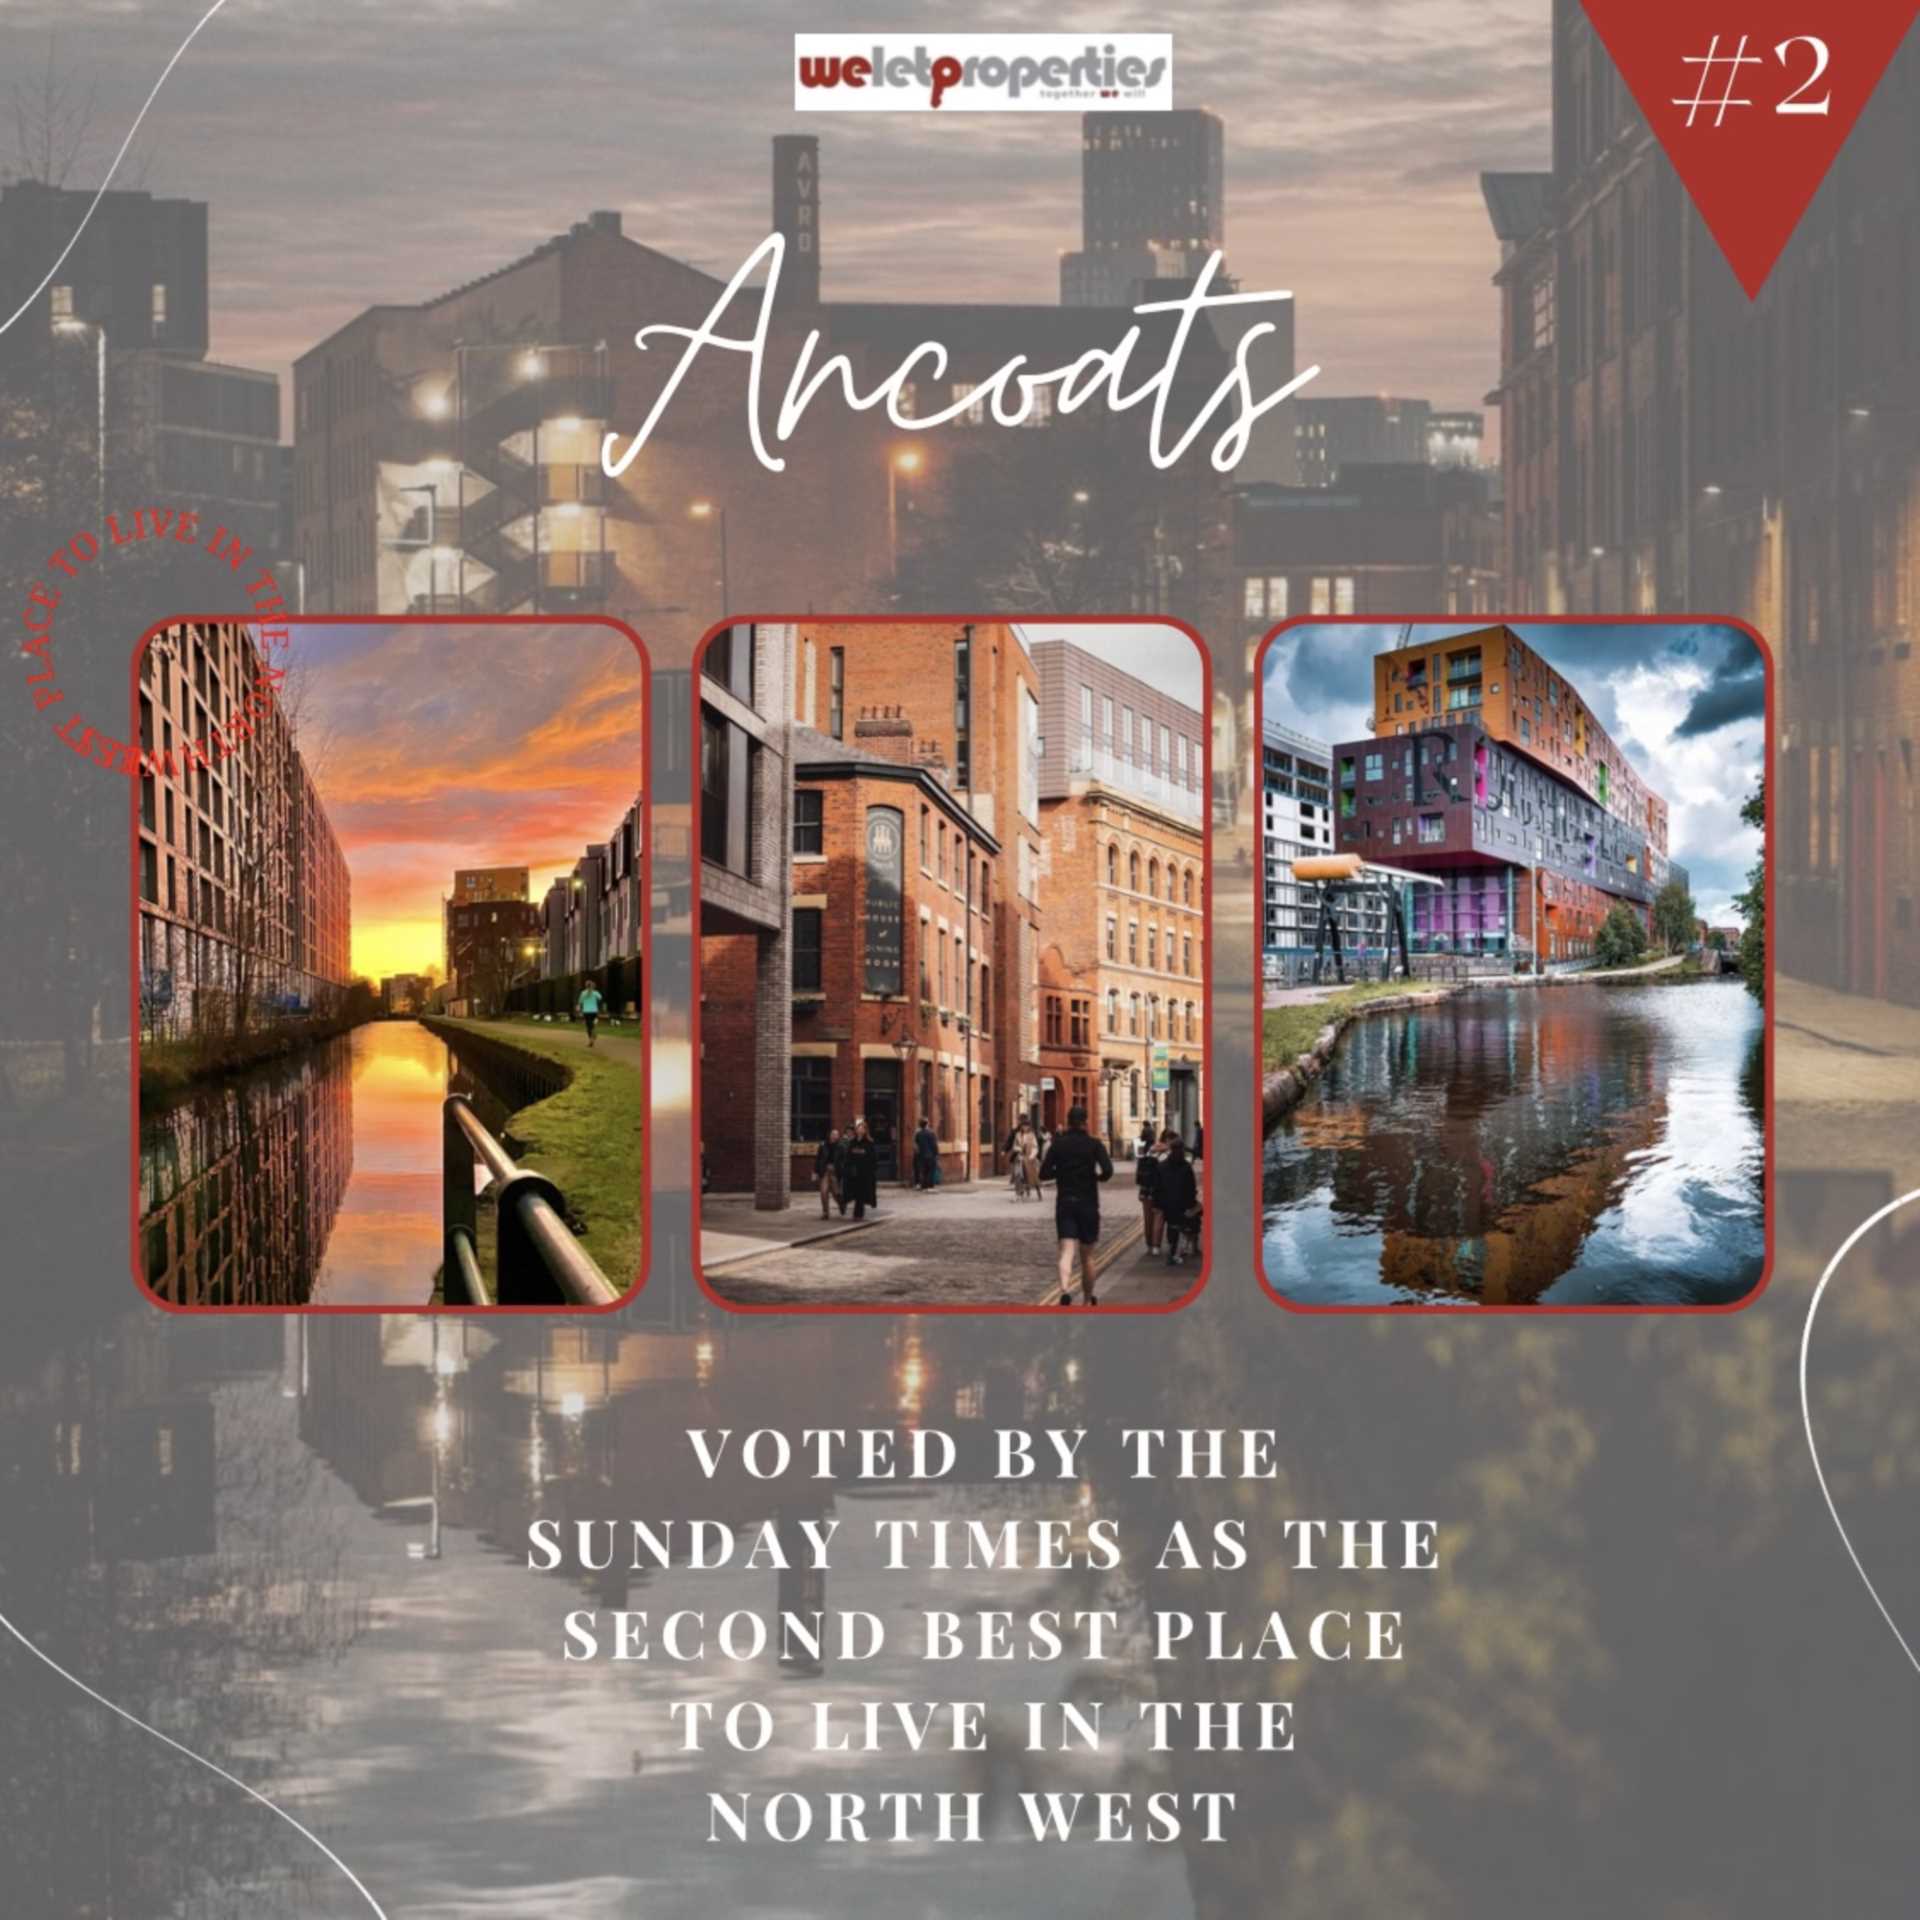 Ancoats - The Place to be!